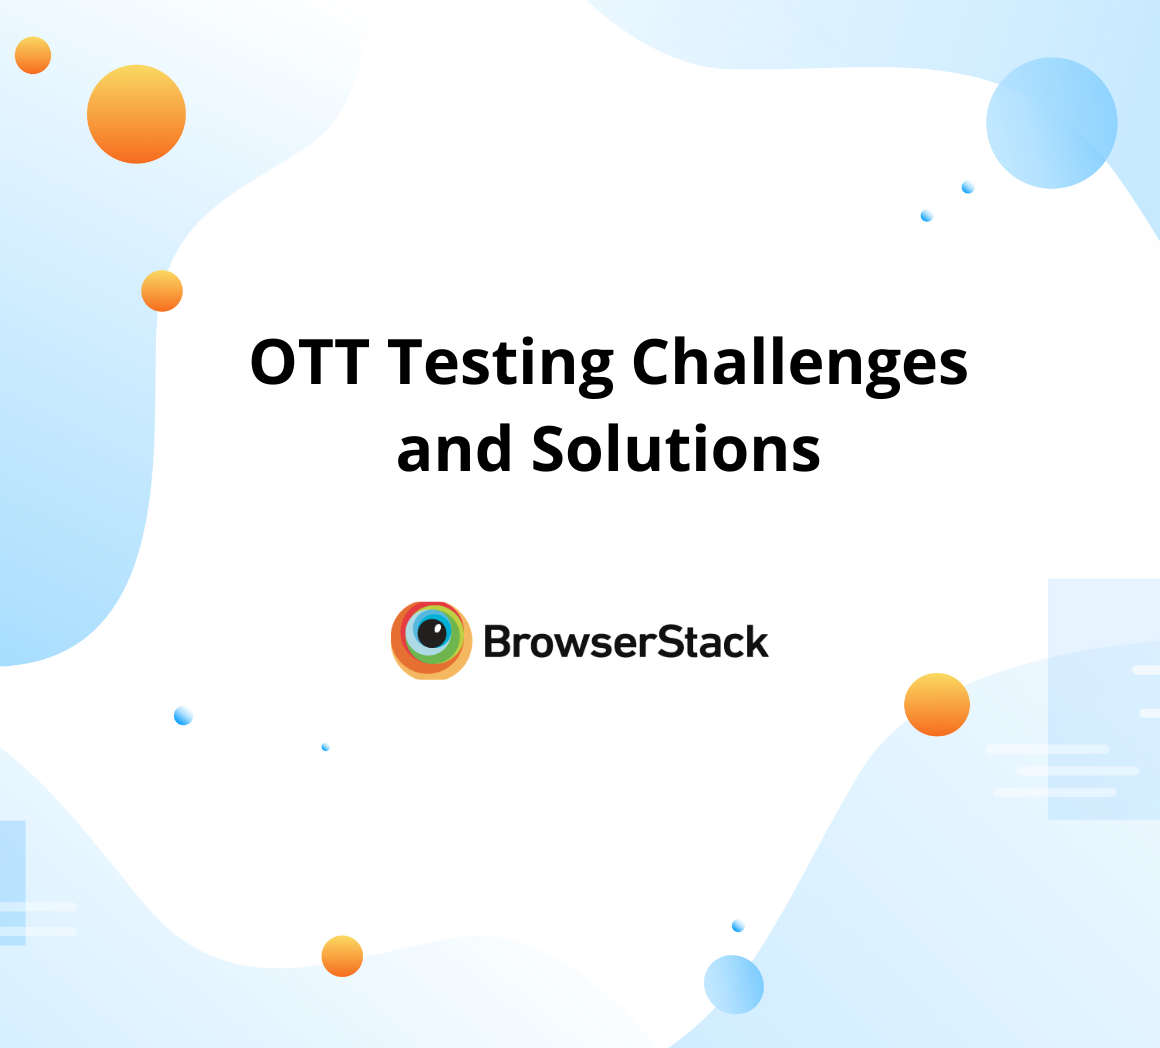 OTT Testing Challenges and Solutions